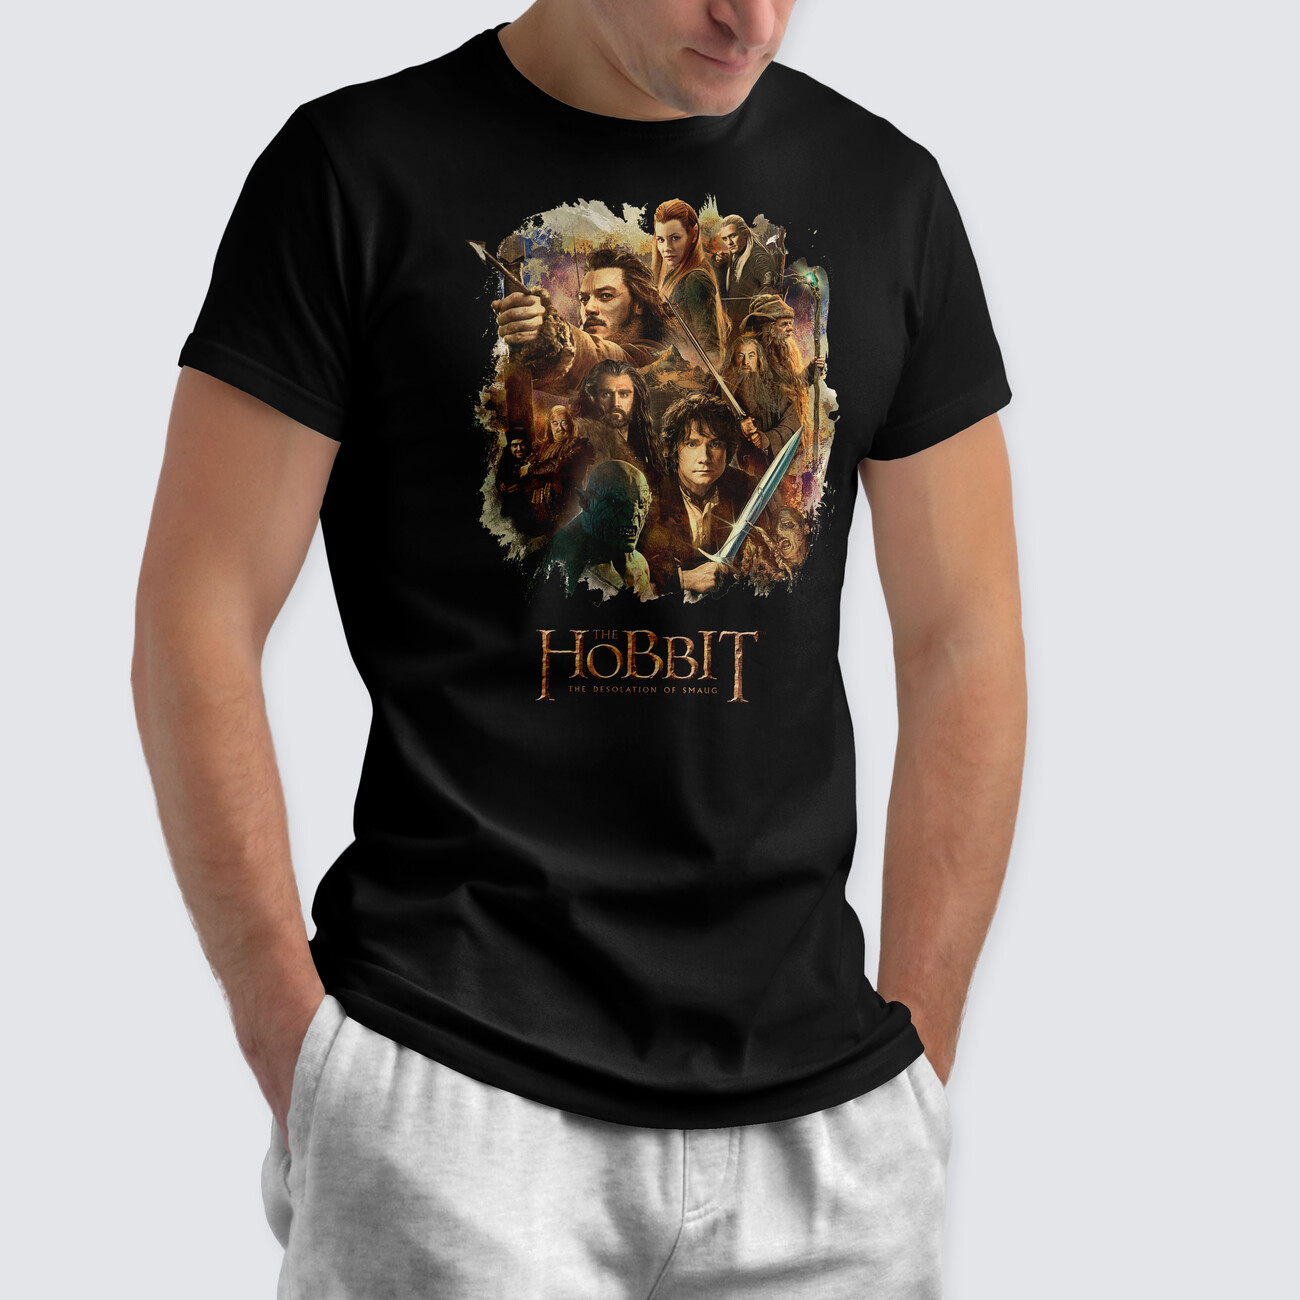 Hobbit: The Desolation of Smaug - Characters | Clothes and accessories for  merchandise fans